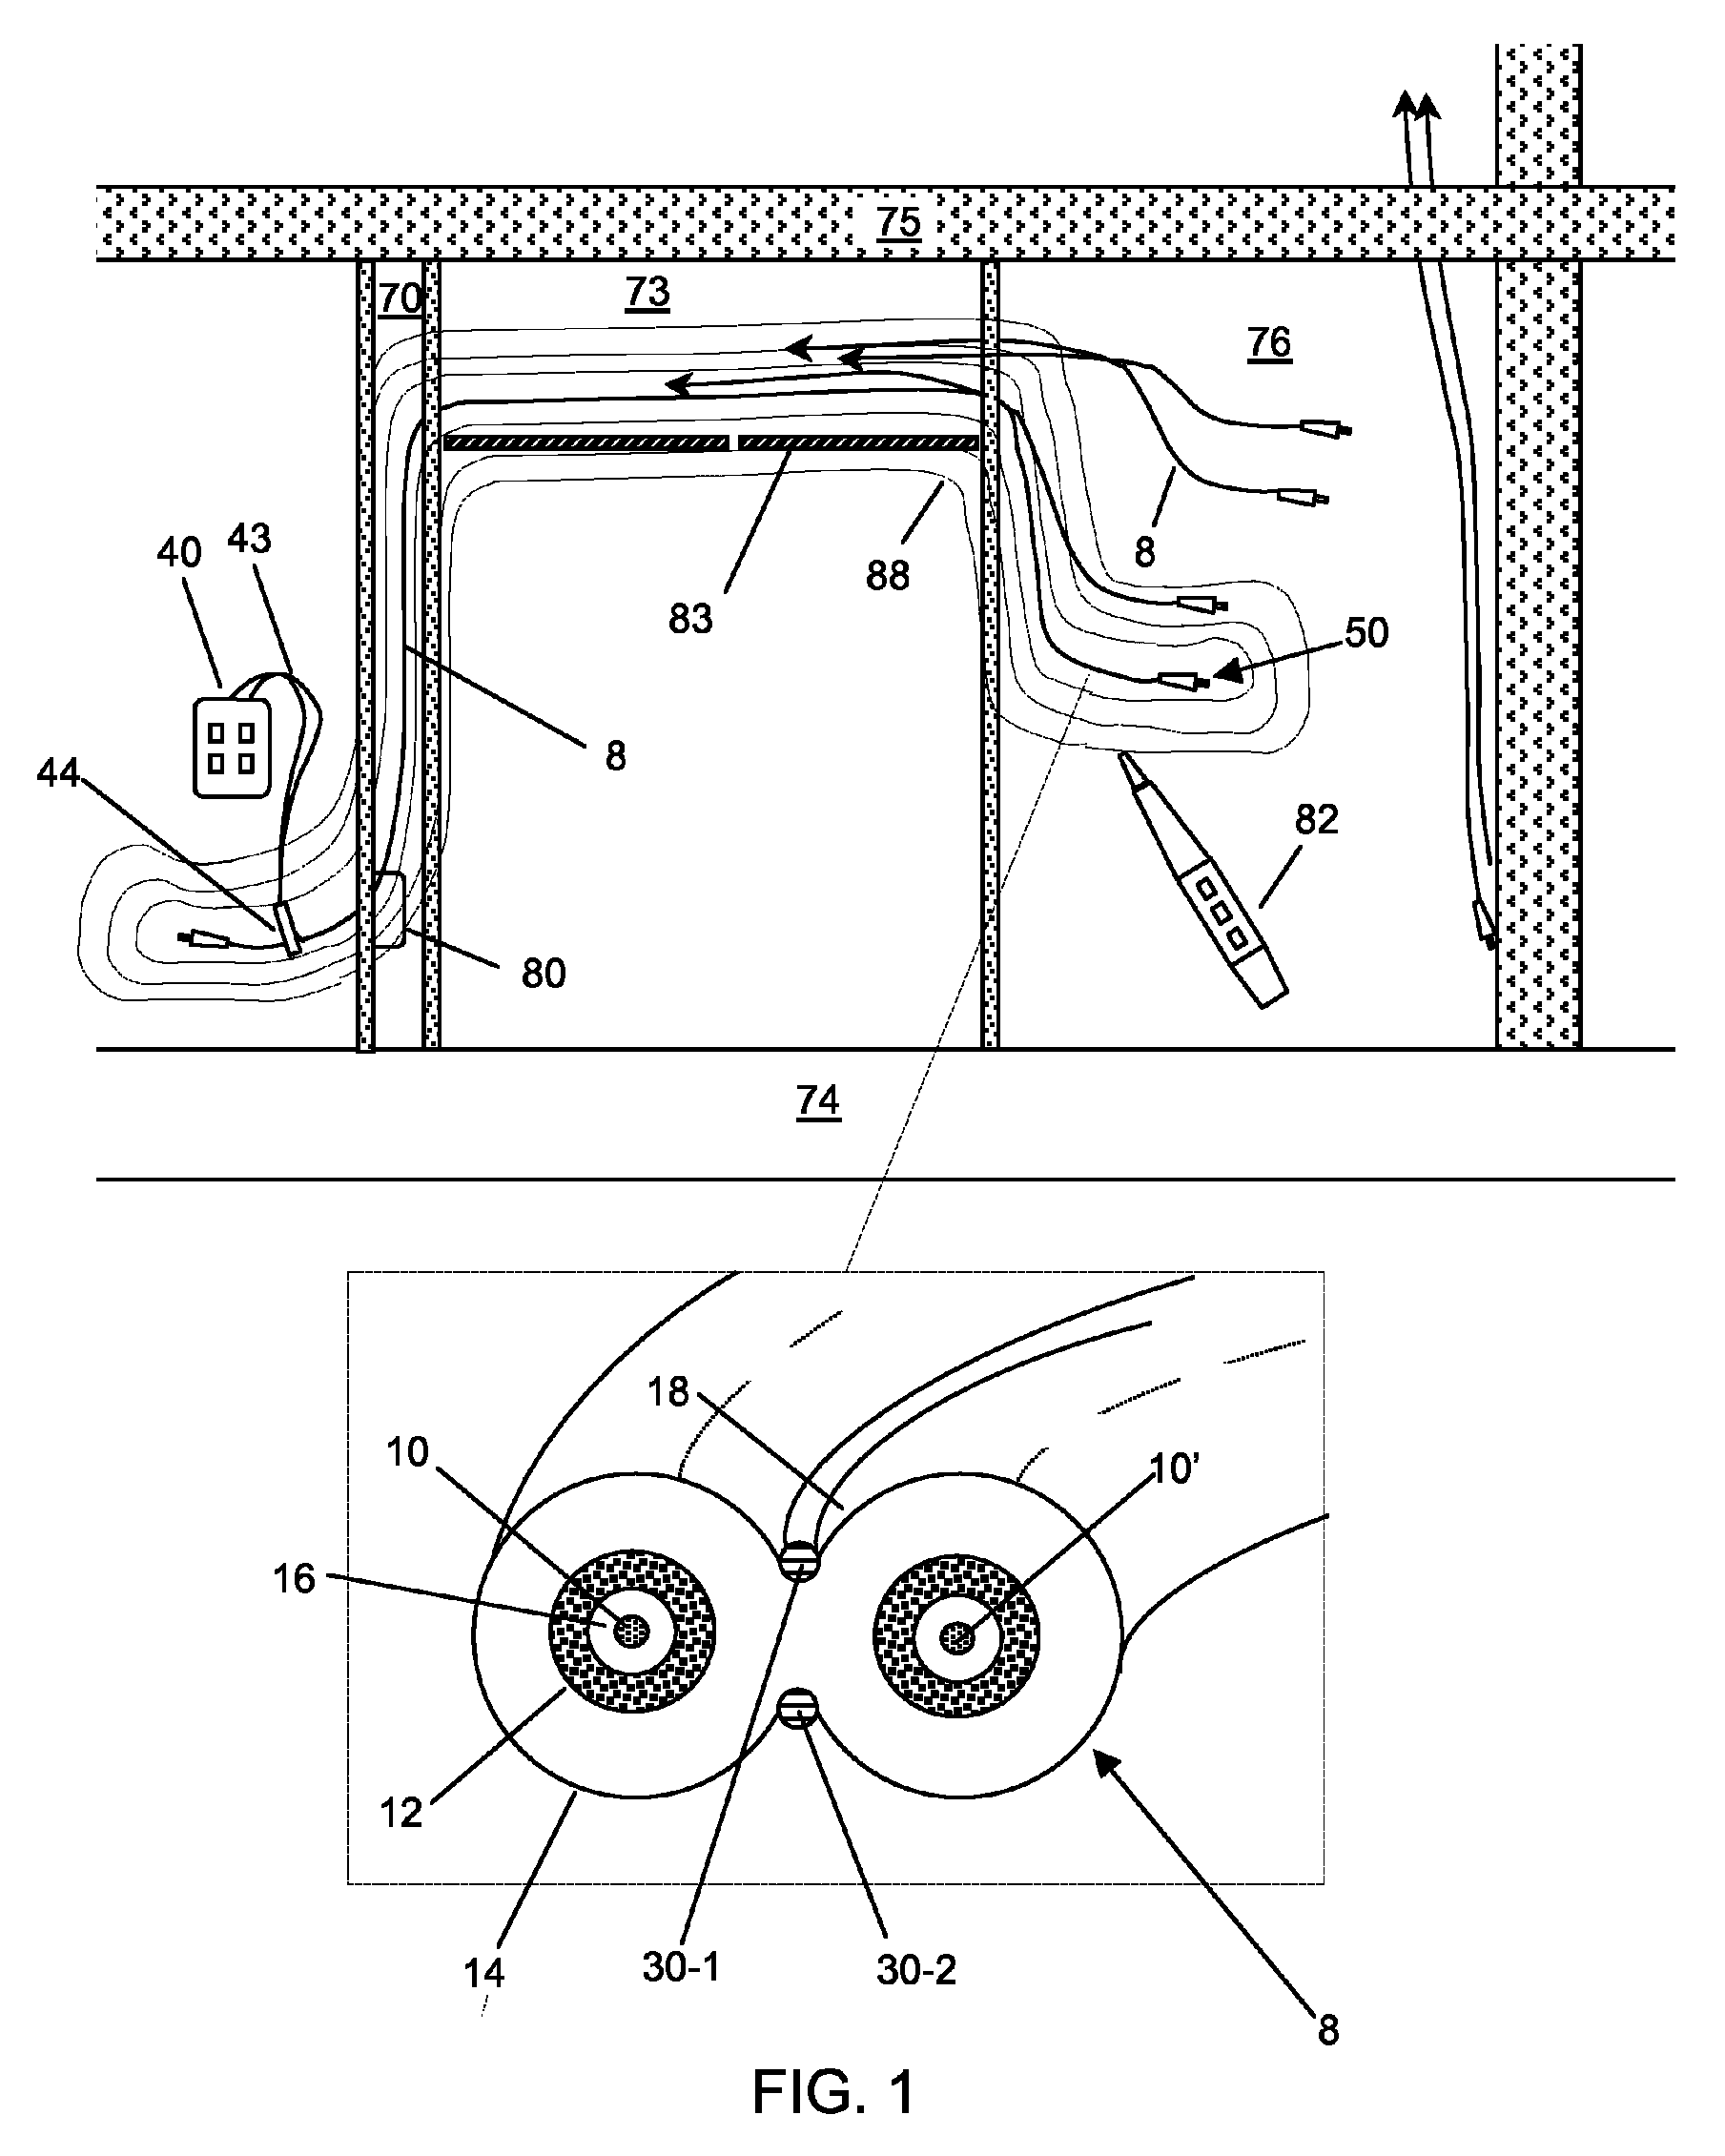 Electrically traceable and identifiable fiber optic cables and connectors